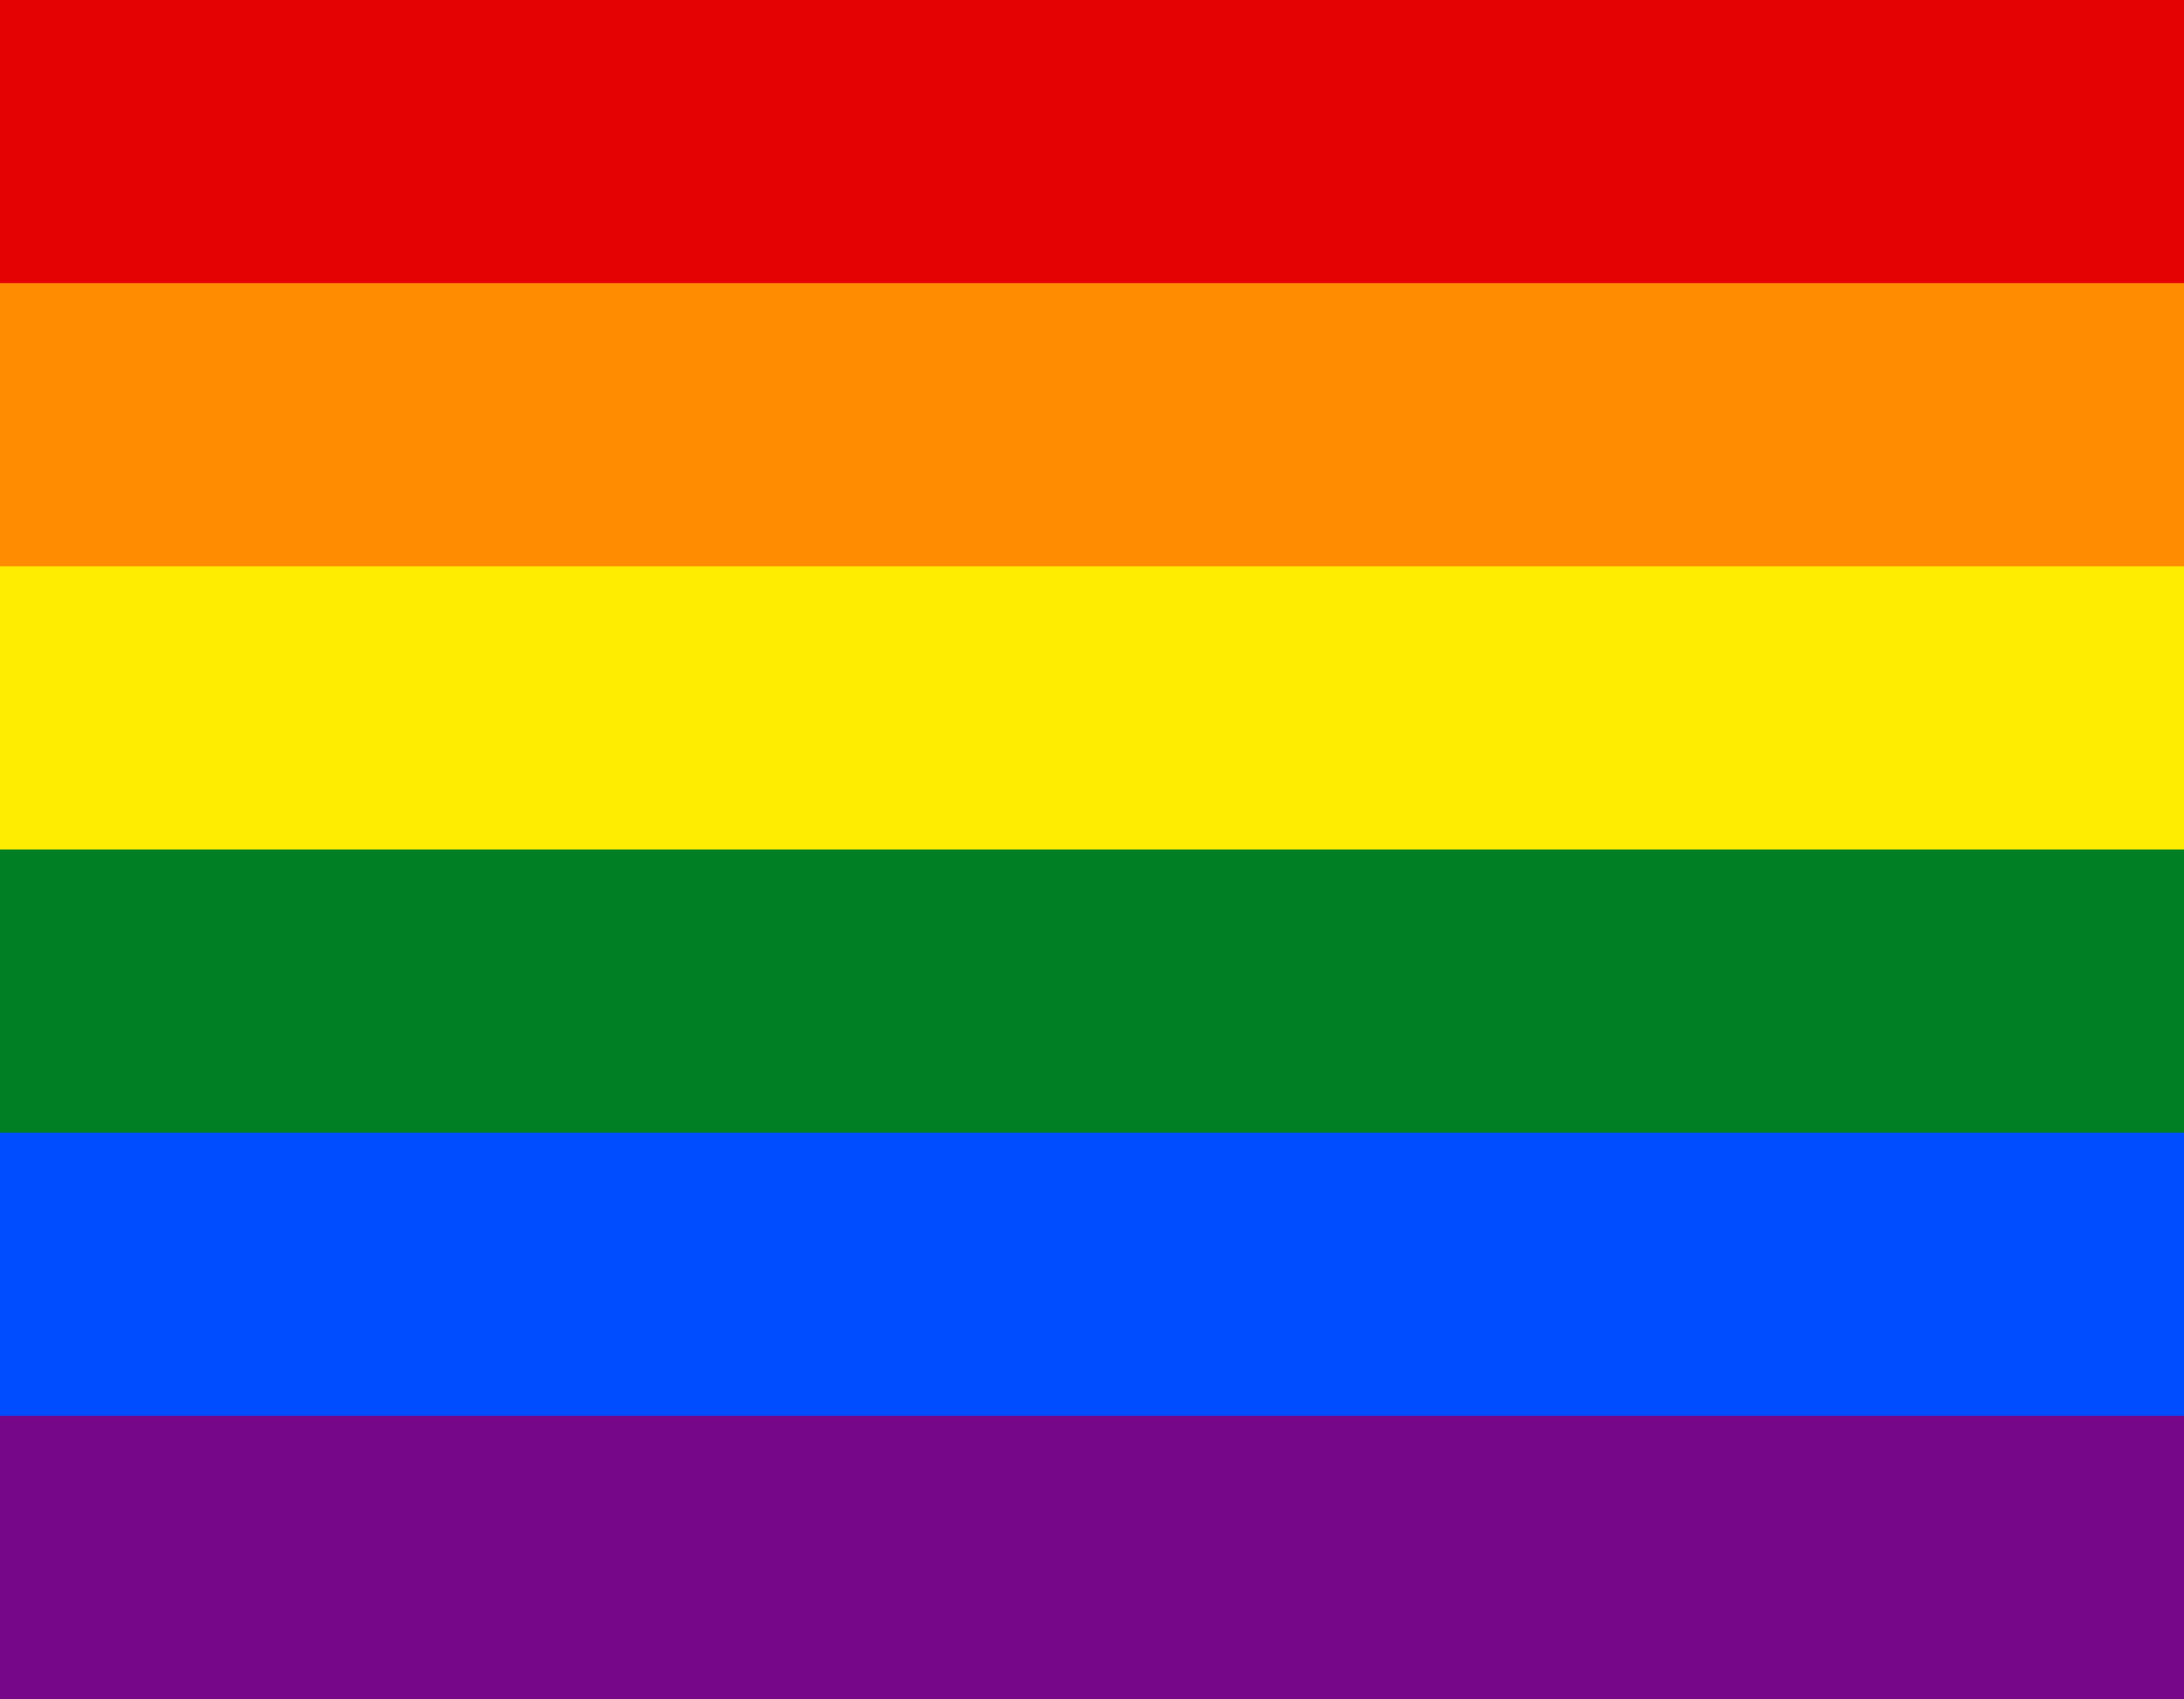 who created the pride flag